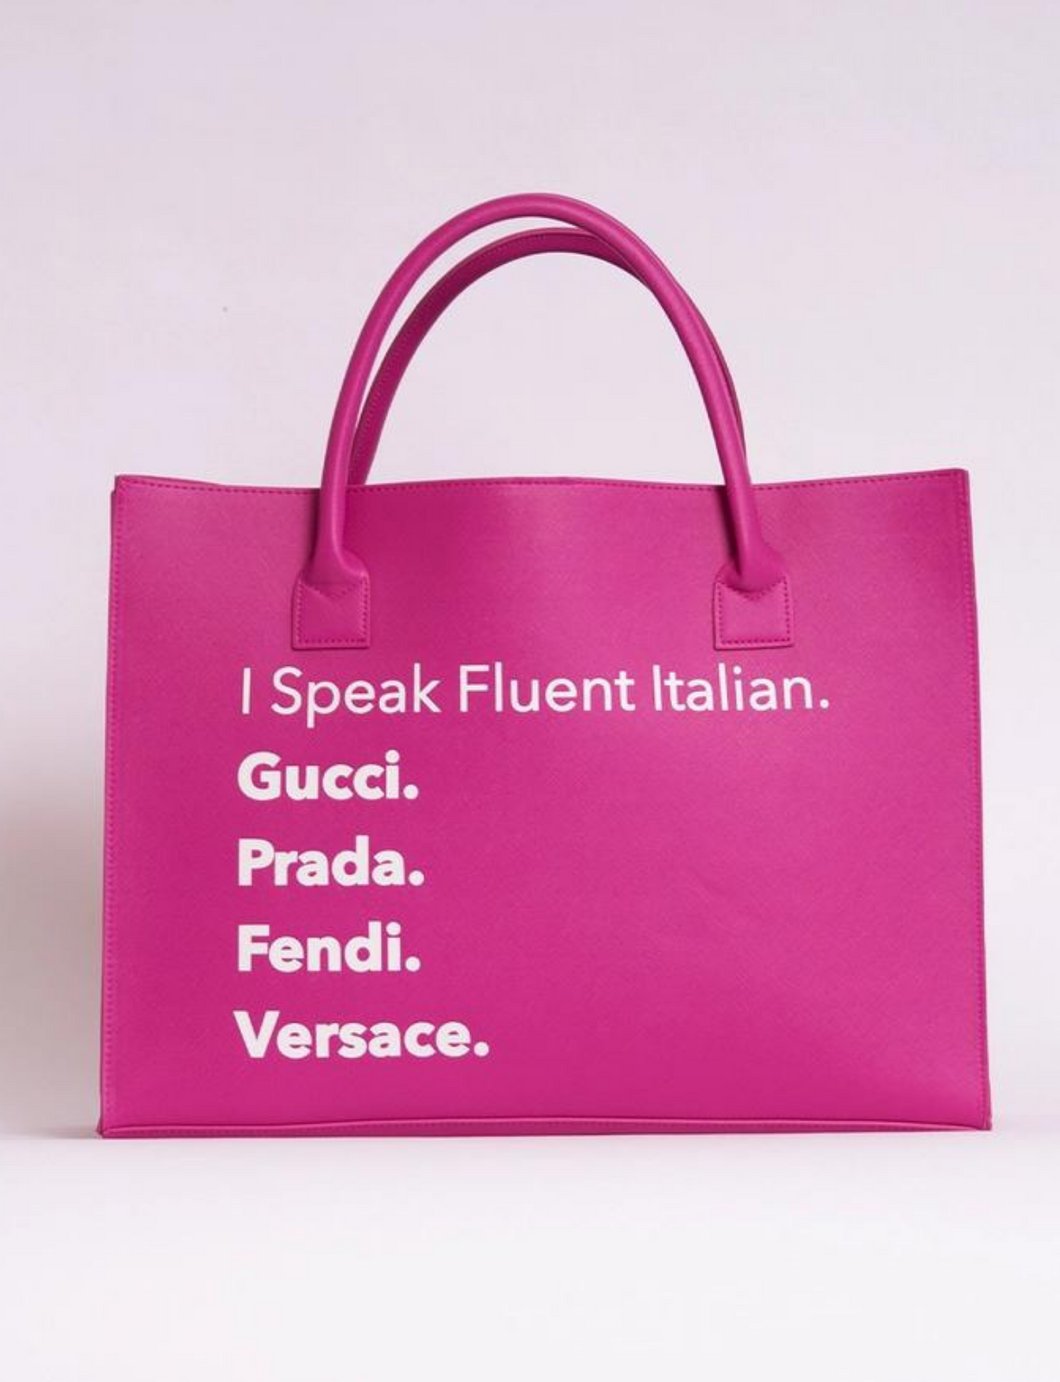 I found a bag that says “I speak fluent Italian” - Wugs and Whimsy